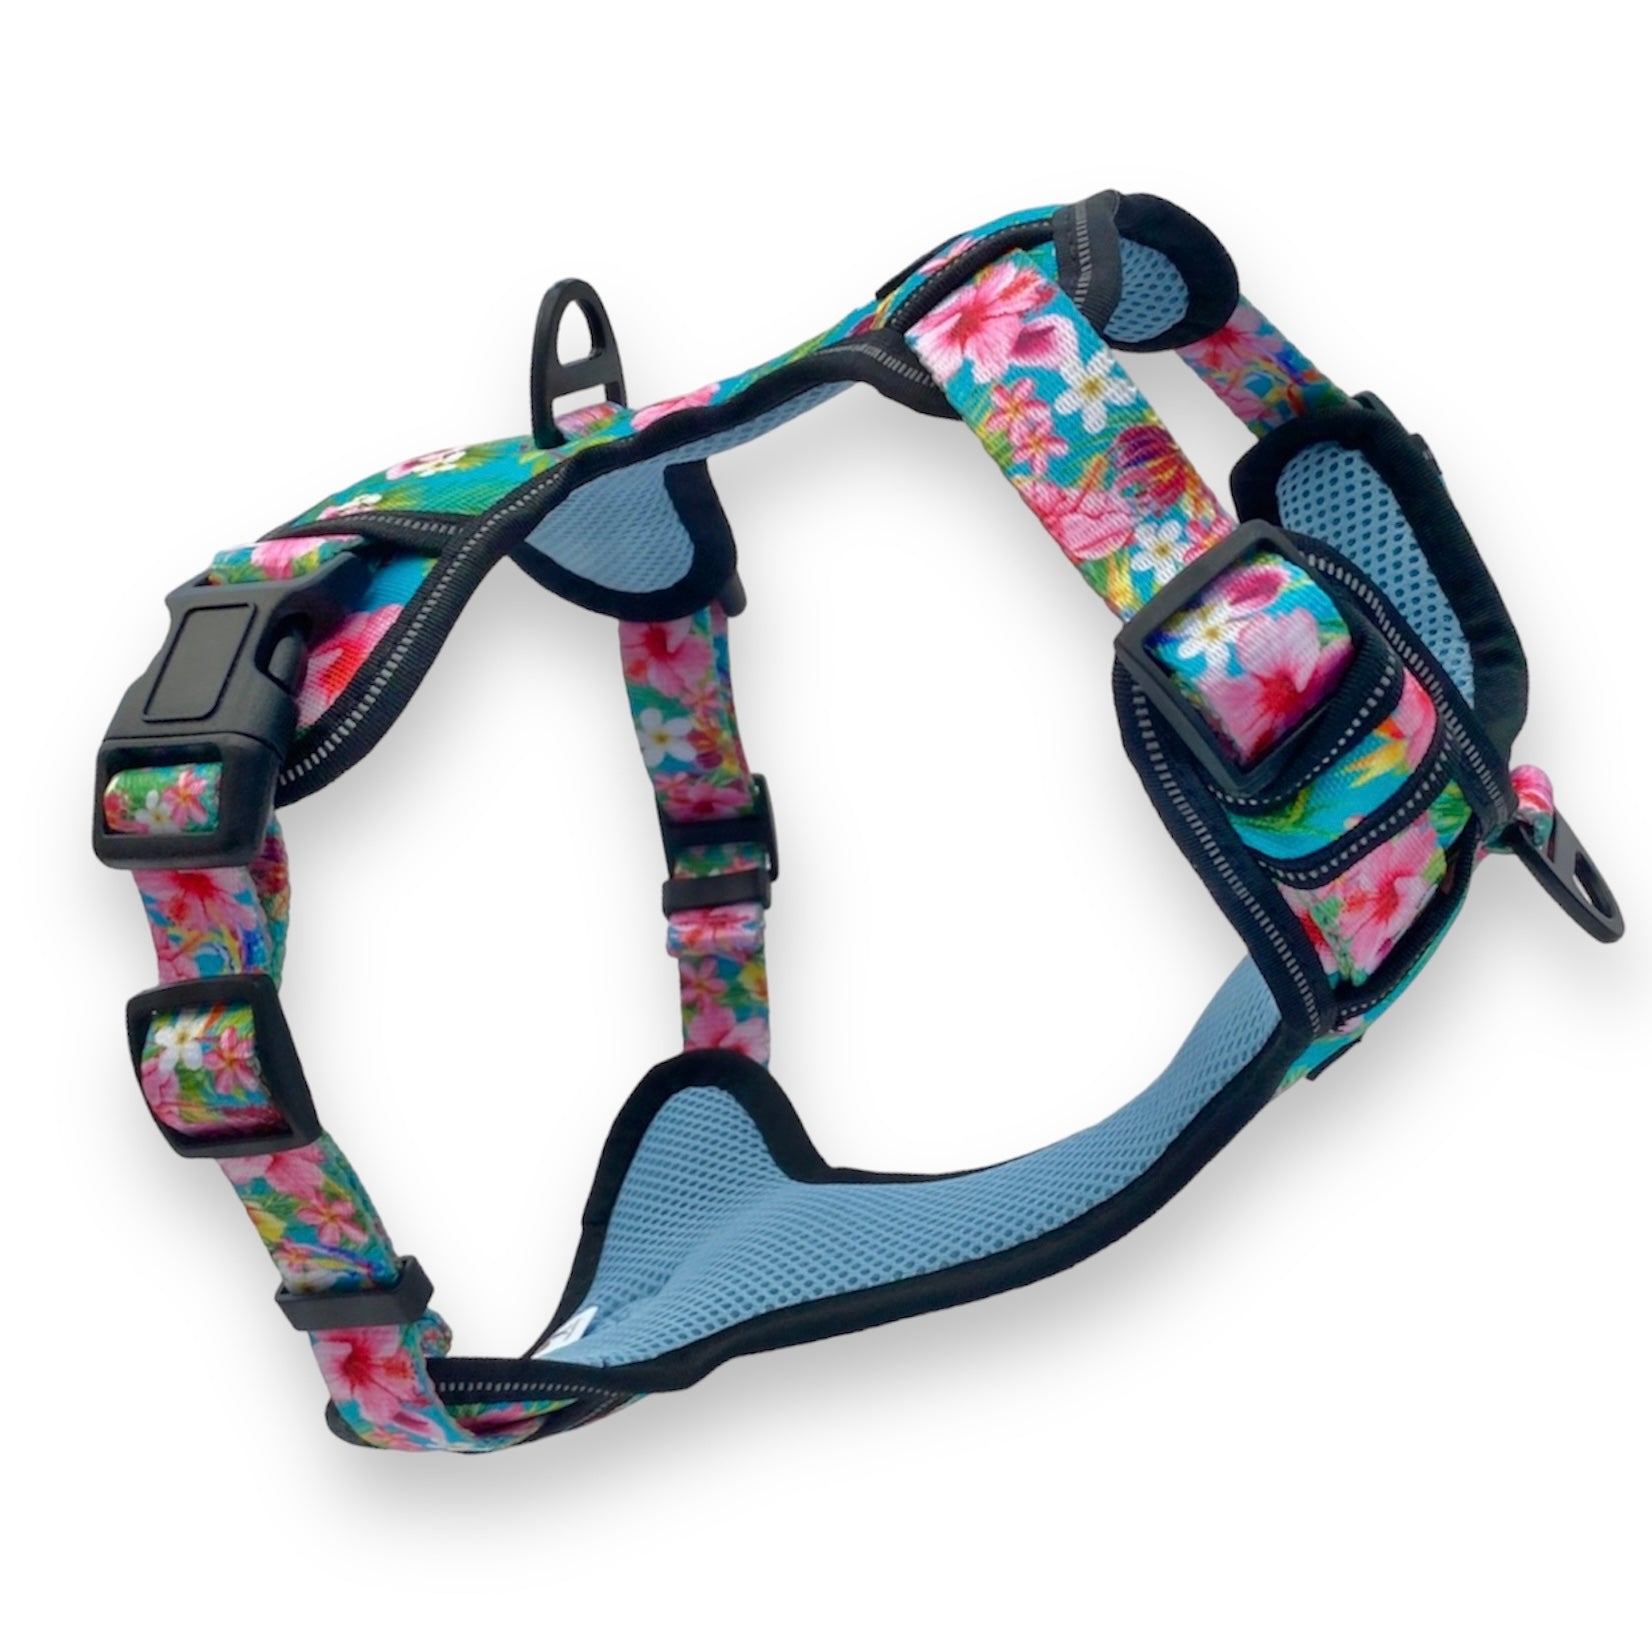 a 3d image of an escape proof dog harness from fearless pet in a bright pink floral pattern with a teal blue background